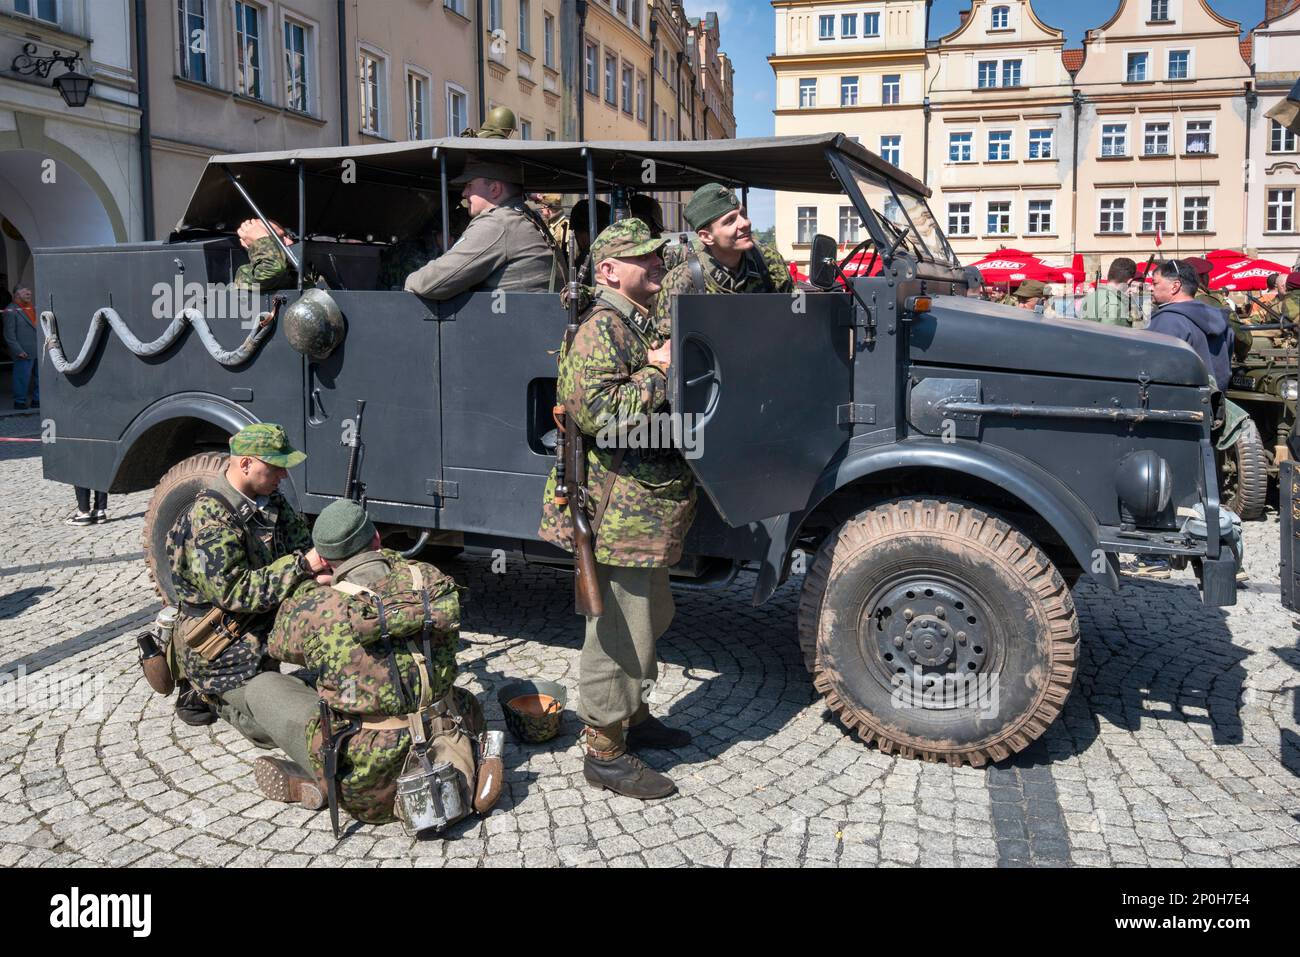 Steyr 1500 truck, reenactors in Waffen-SS German uniforms, before reenactment of WW2 battle, City Hall Square in Jelenia Góra, Lower Silesia, Poland Stock Photo